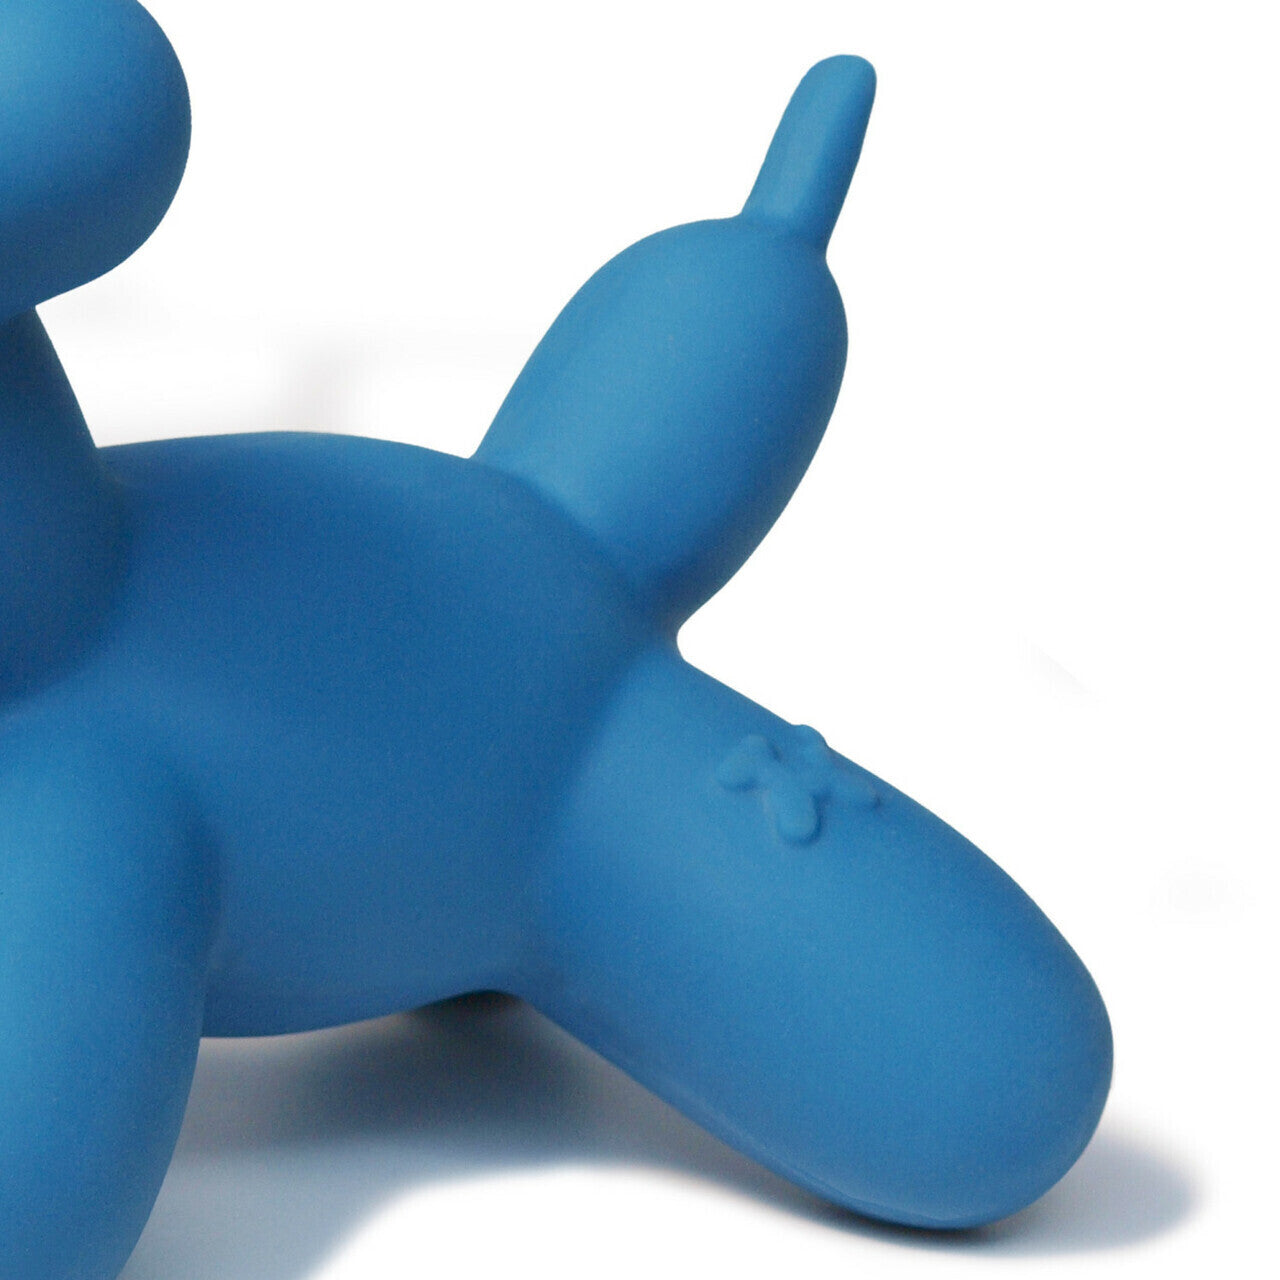 Charming Pet Latex Squeaker Dog Toy - Blue Balloon Dog - Large - Pets and More